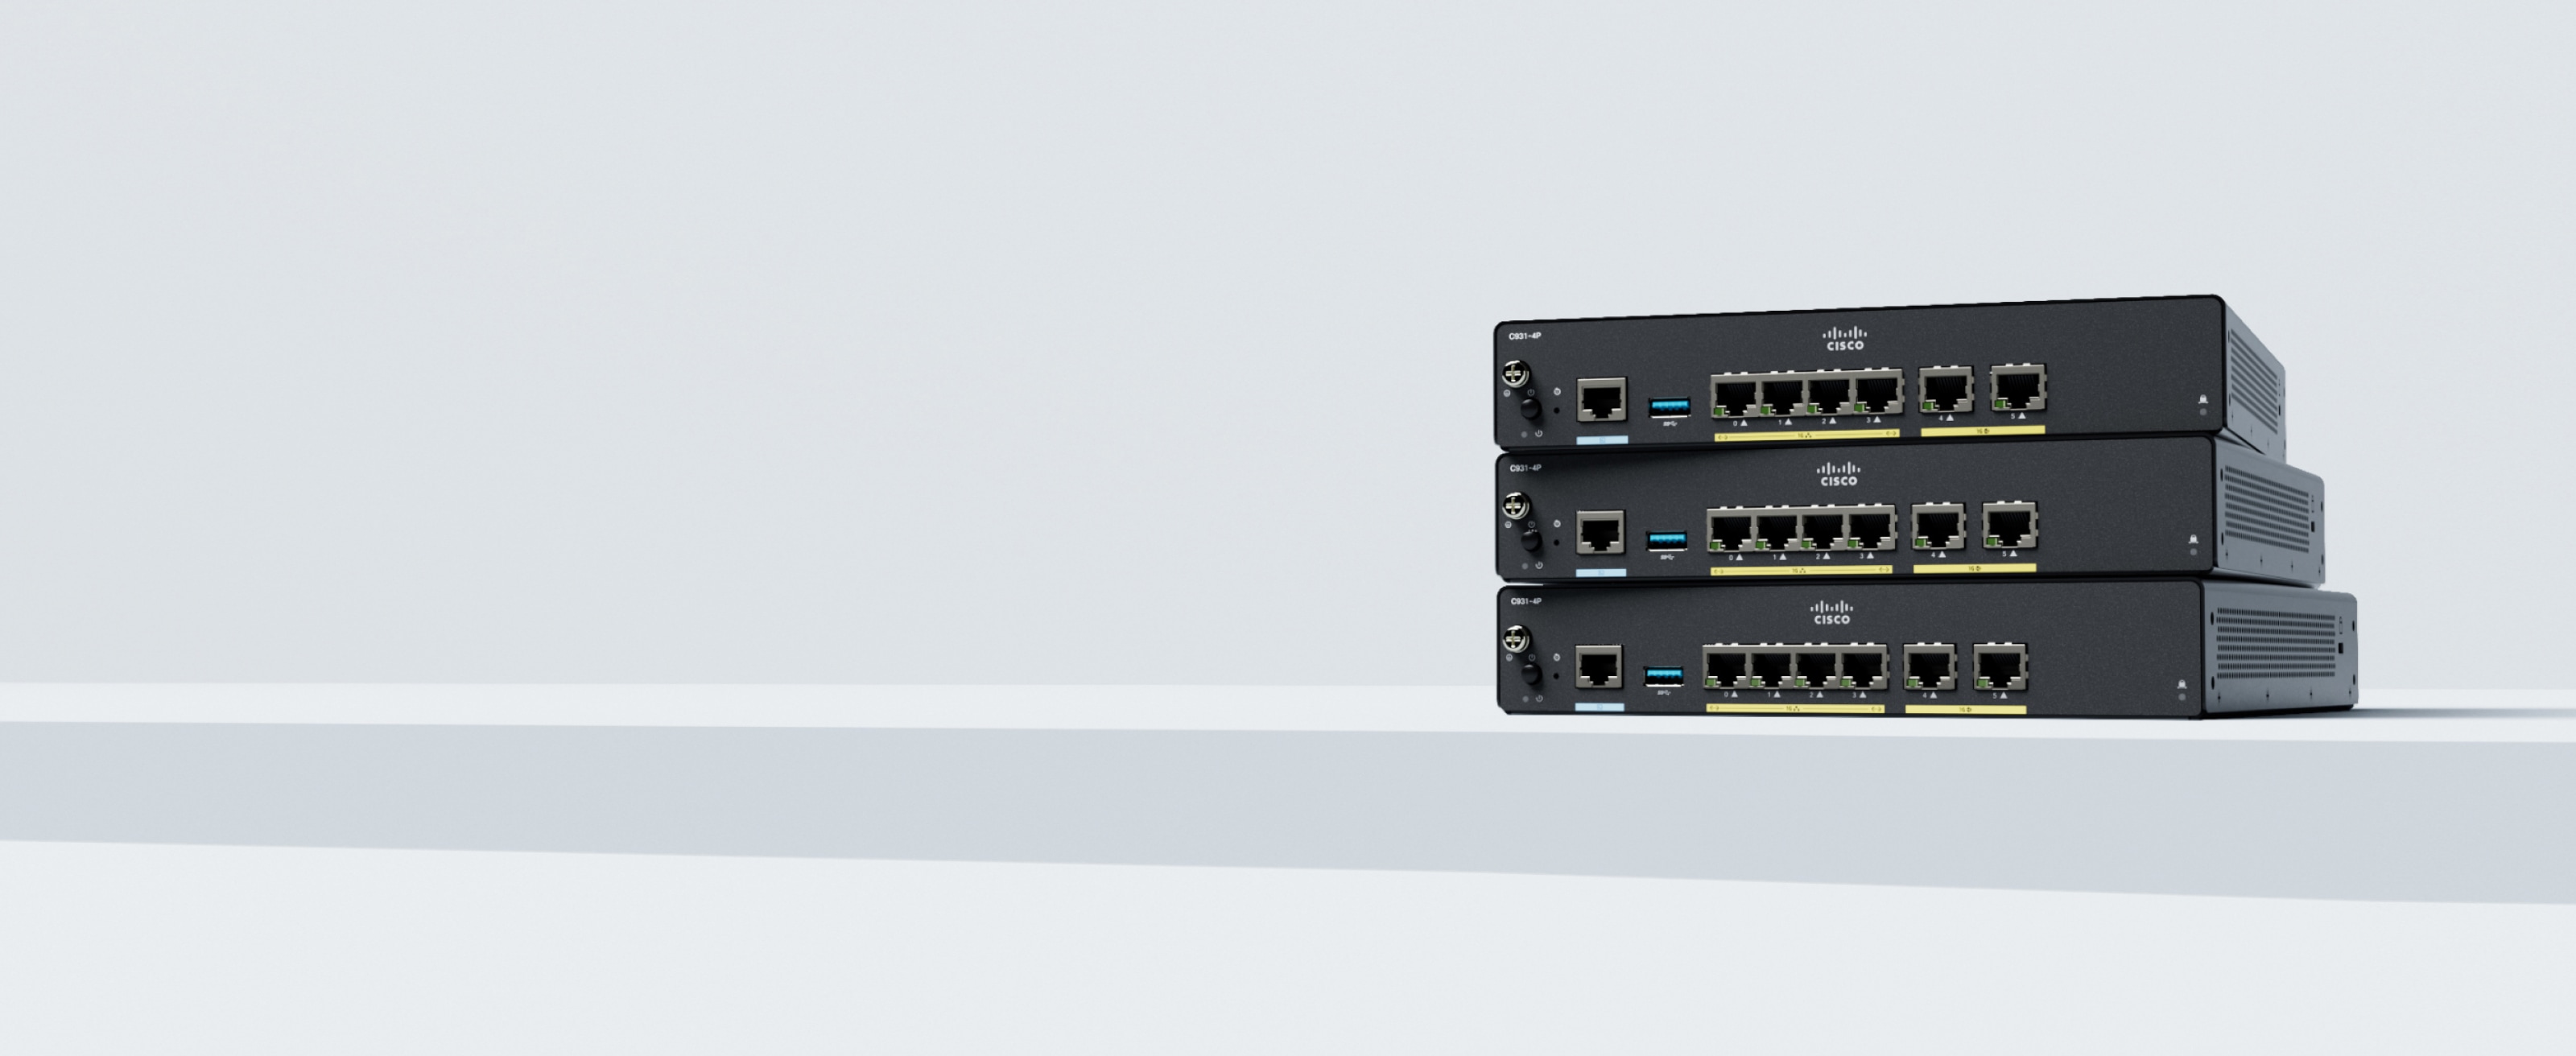 Cisco 900 Series Integrated Services Routers (ISRs) 